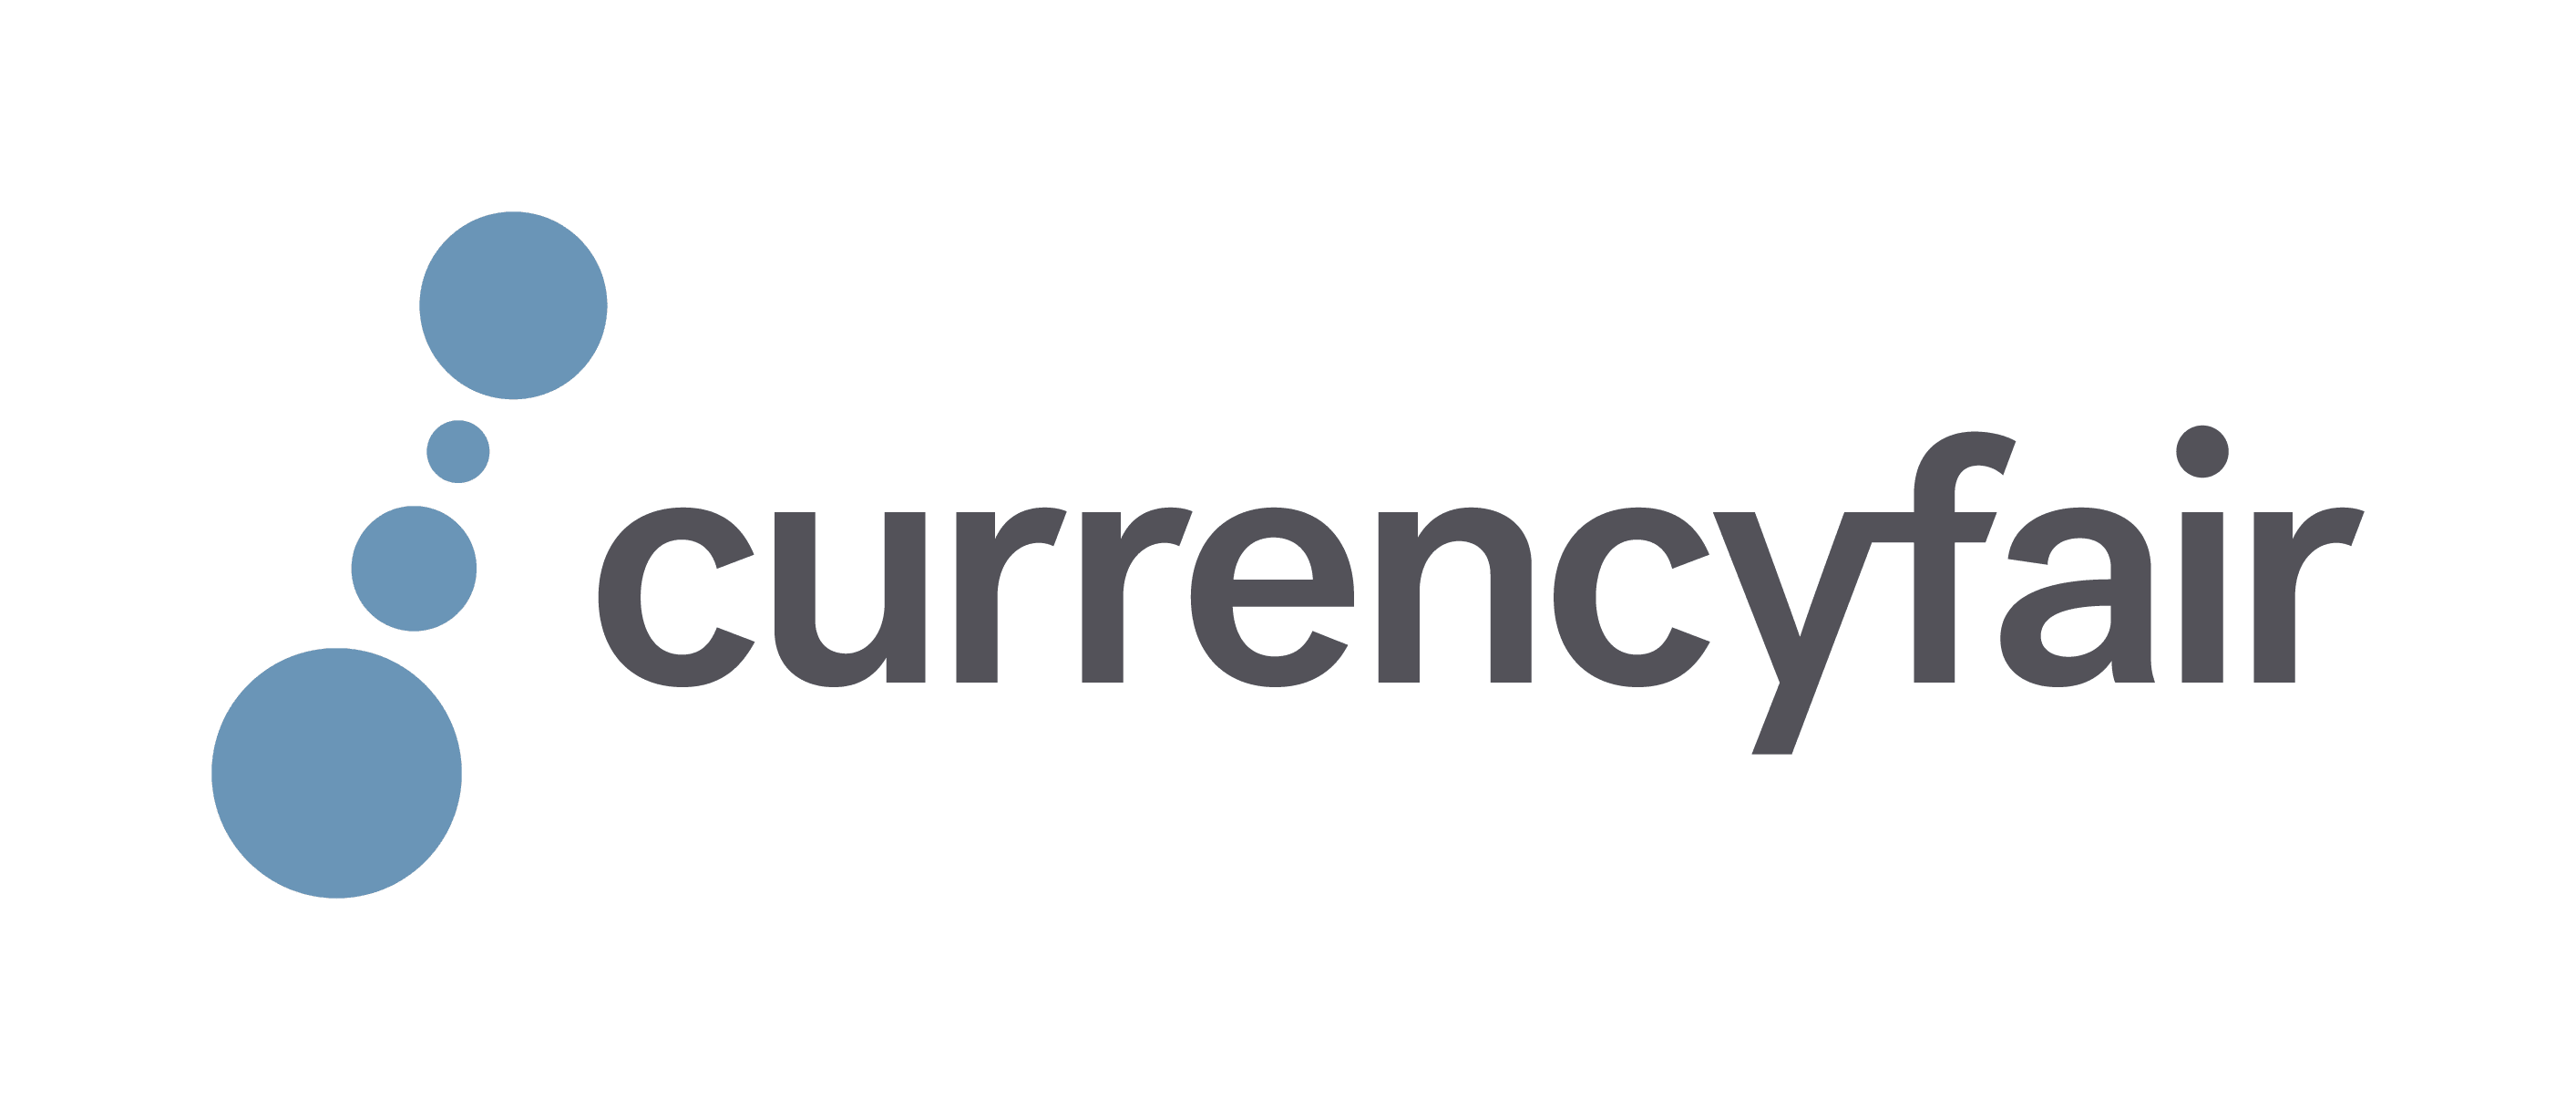 Get started with CurrencyFair